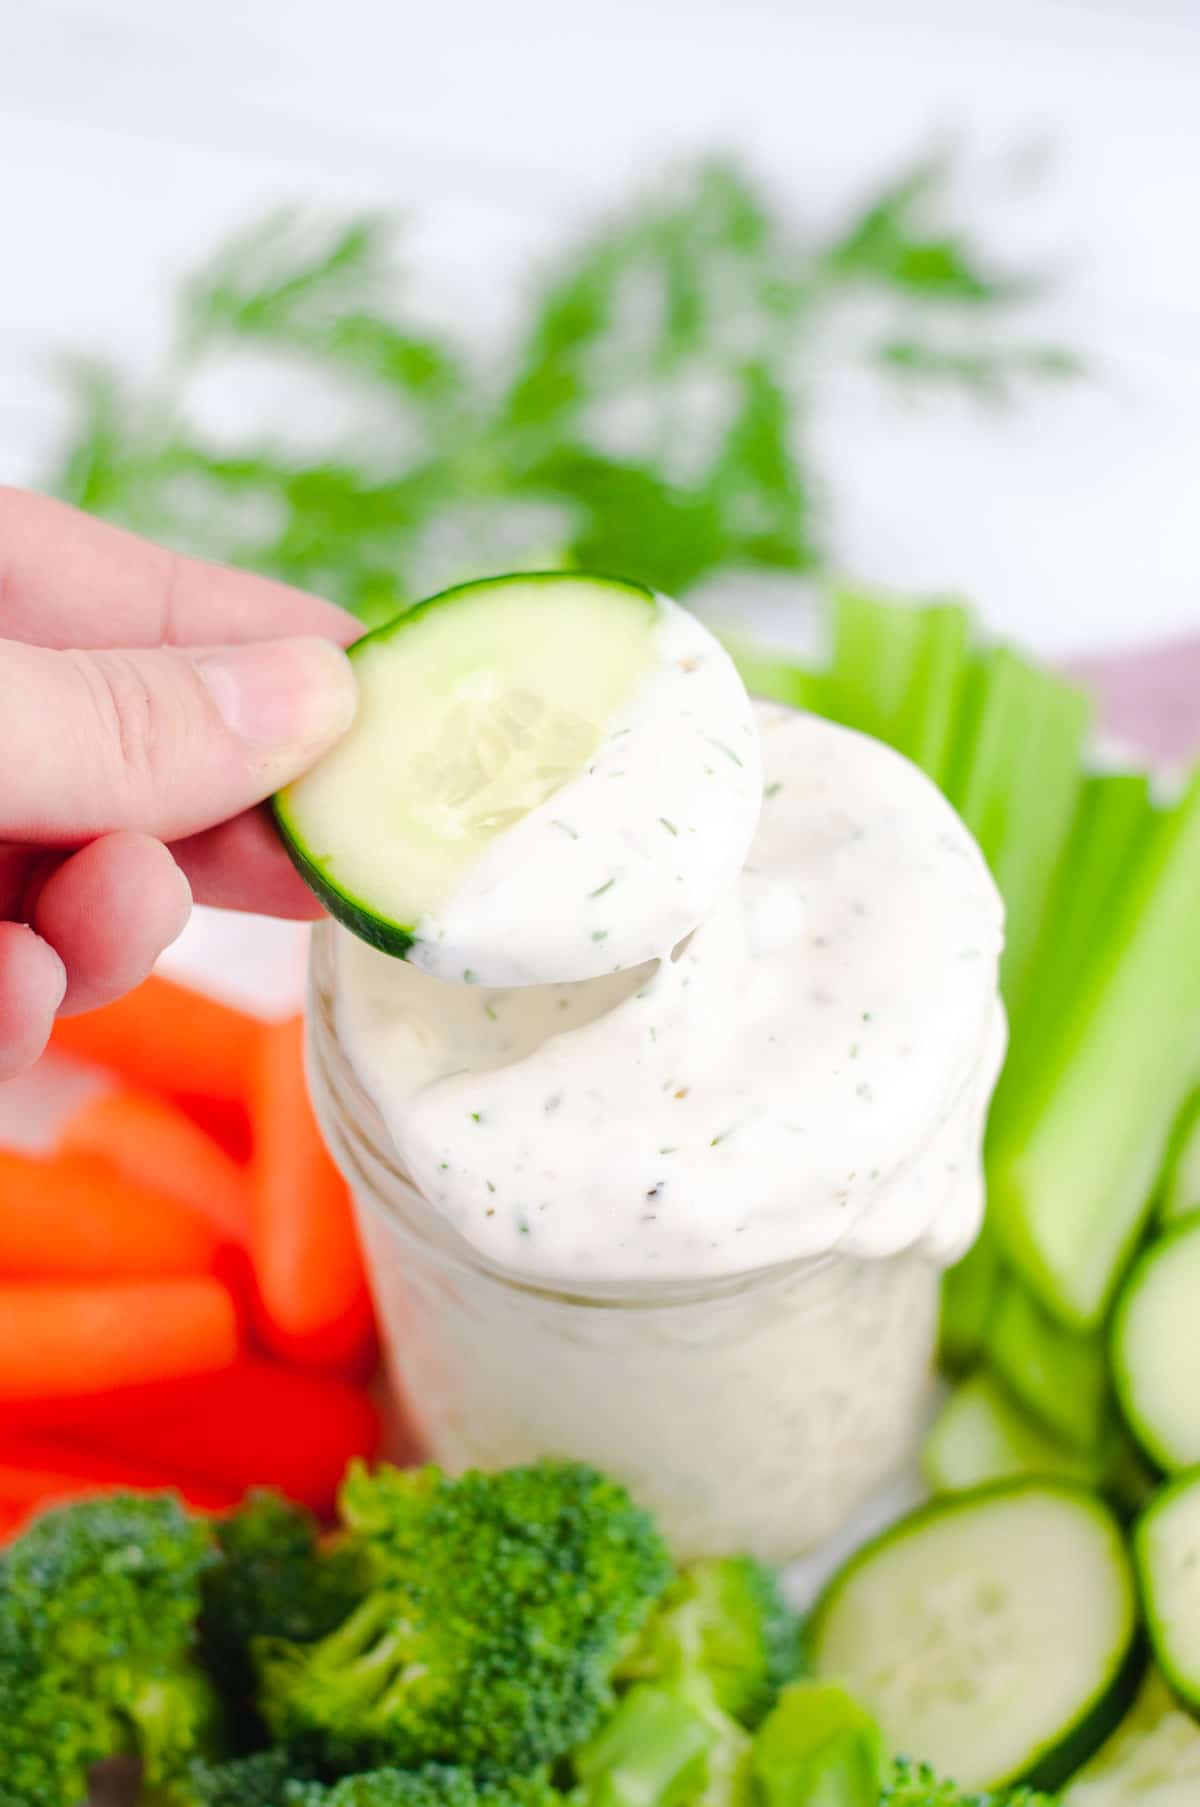 Slice of cucumber being lifted out of jar of ranch.